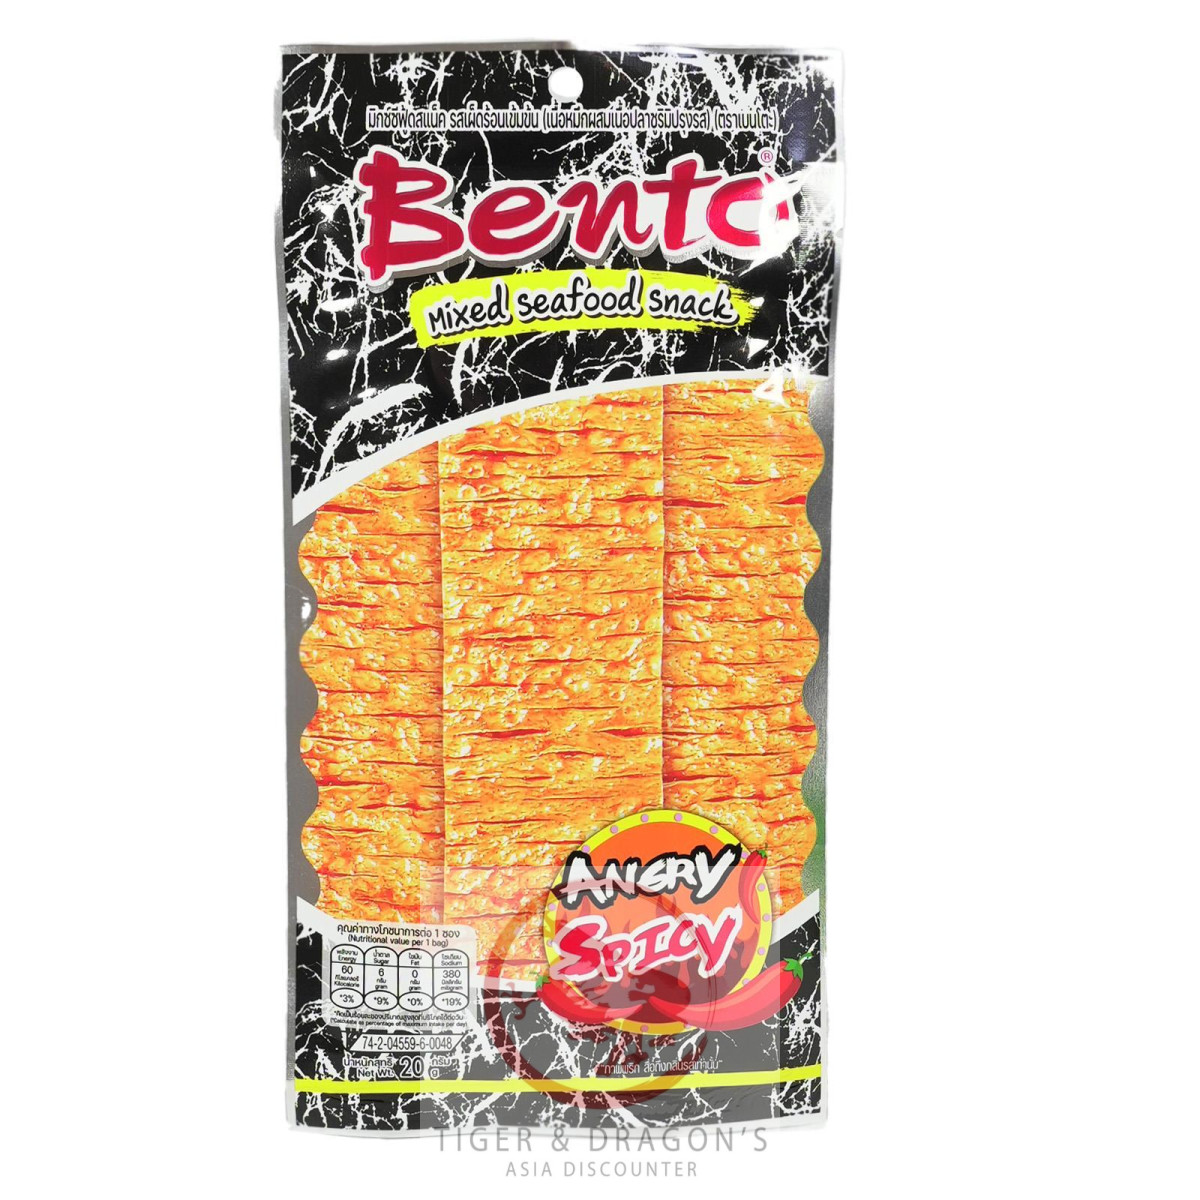 Bento Angry Spicy Mix Seafood Snack scharf 20g